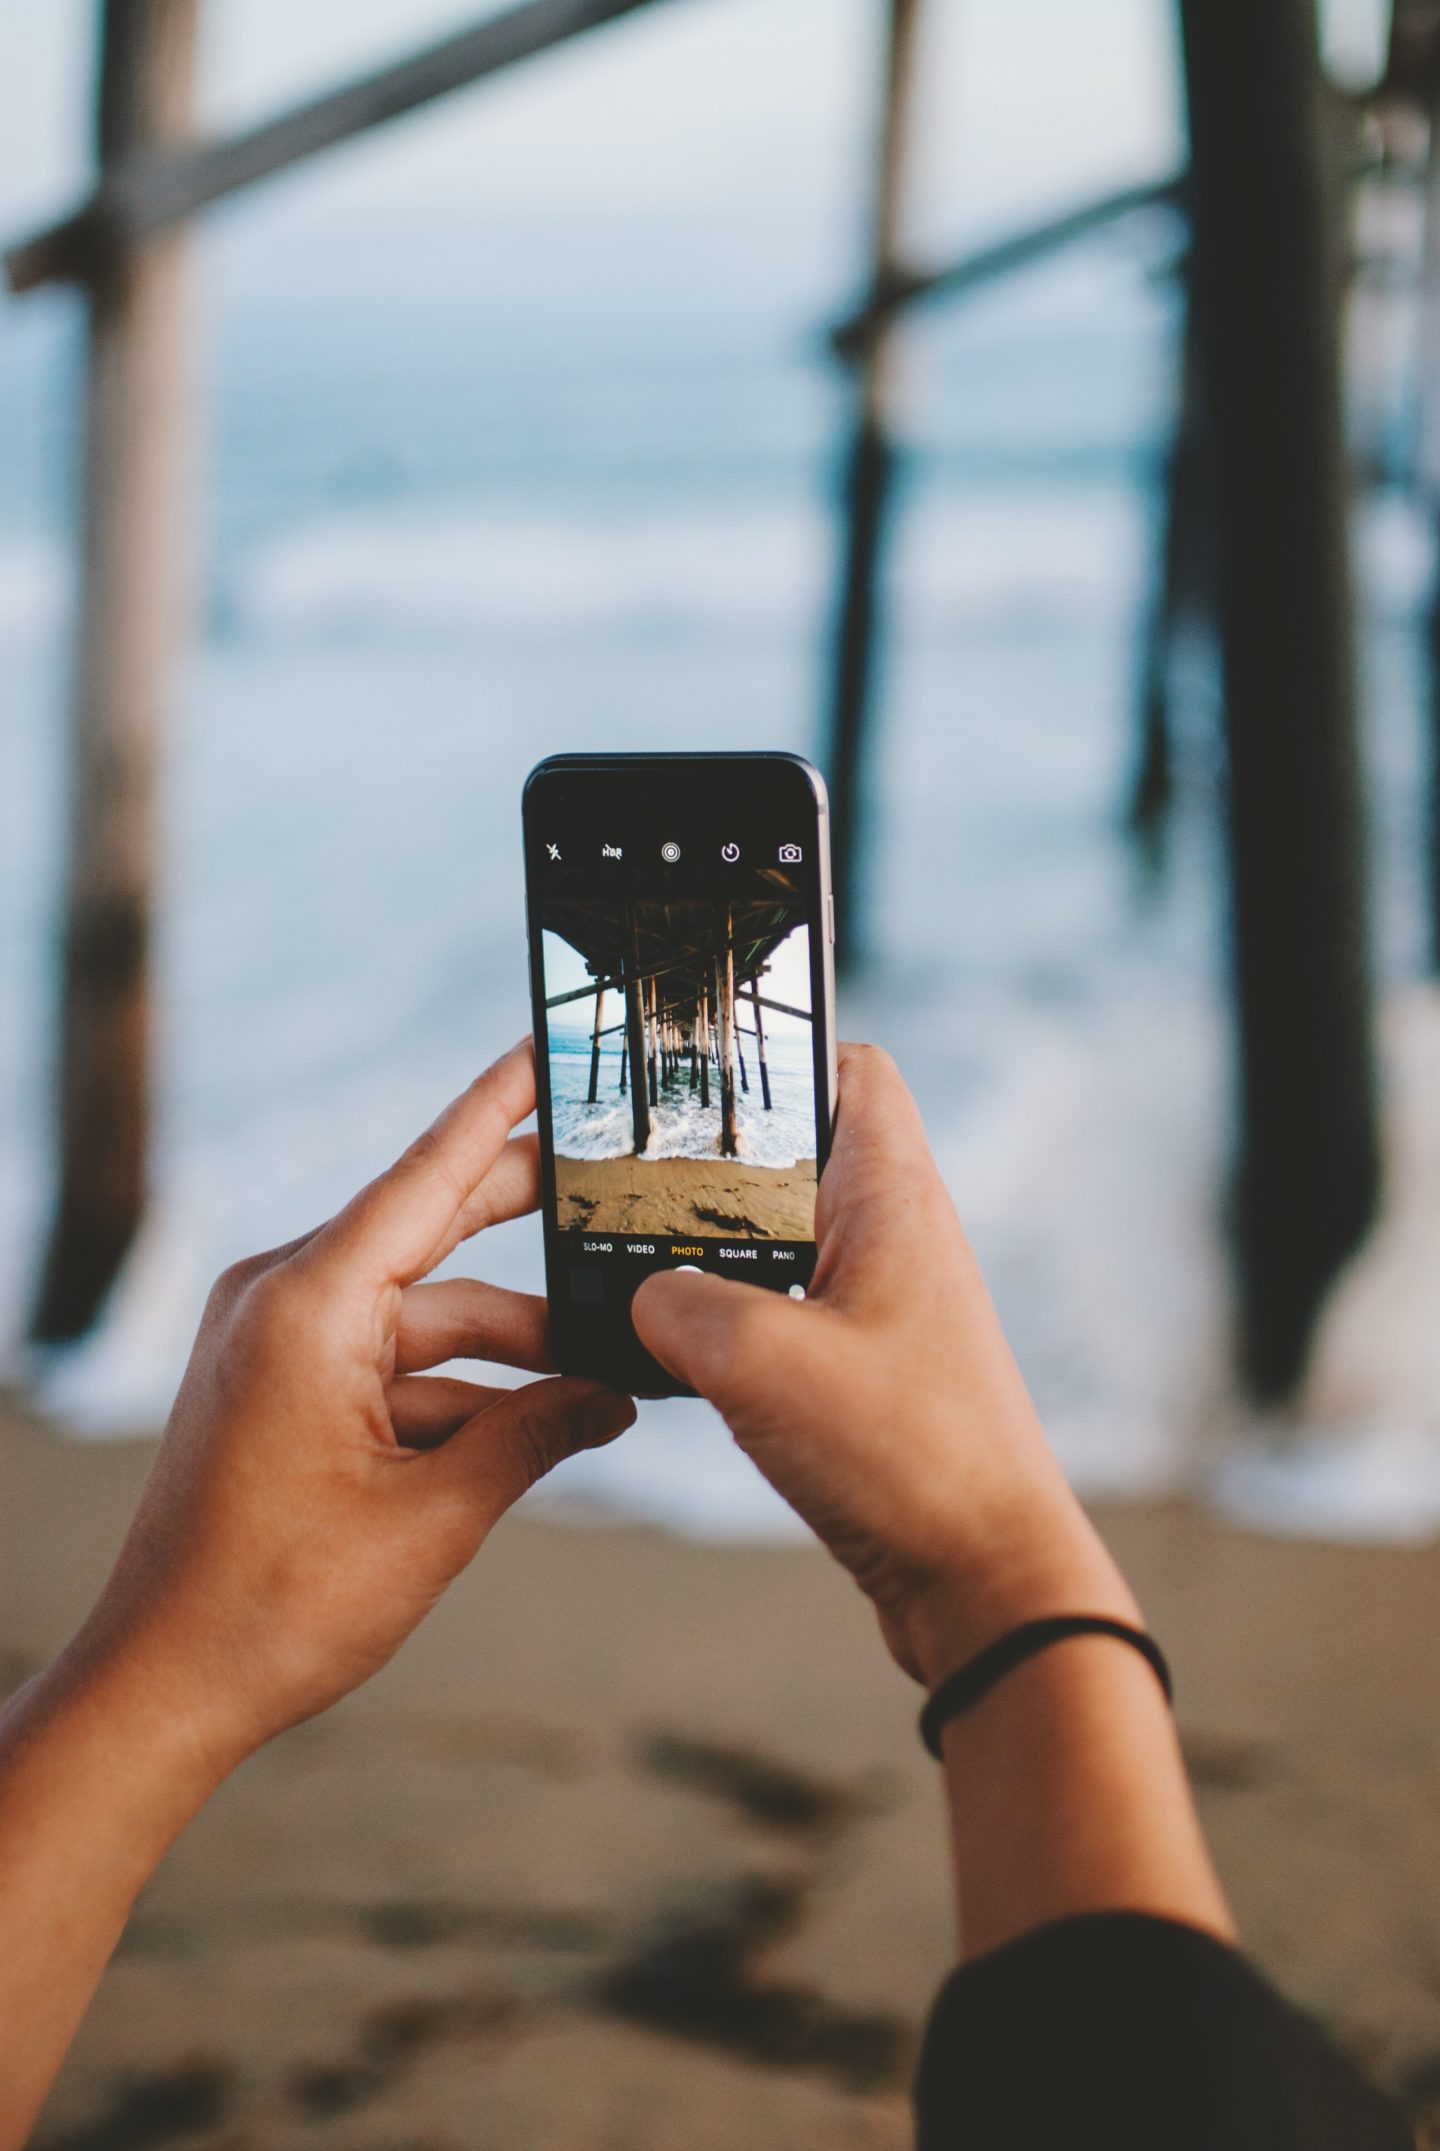 The Most Impactful Instagram Photo Size